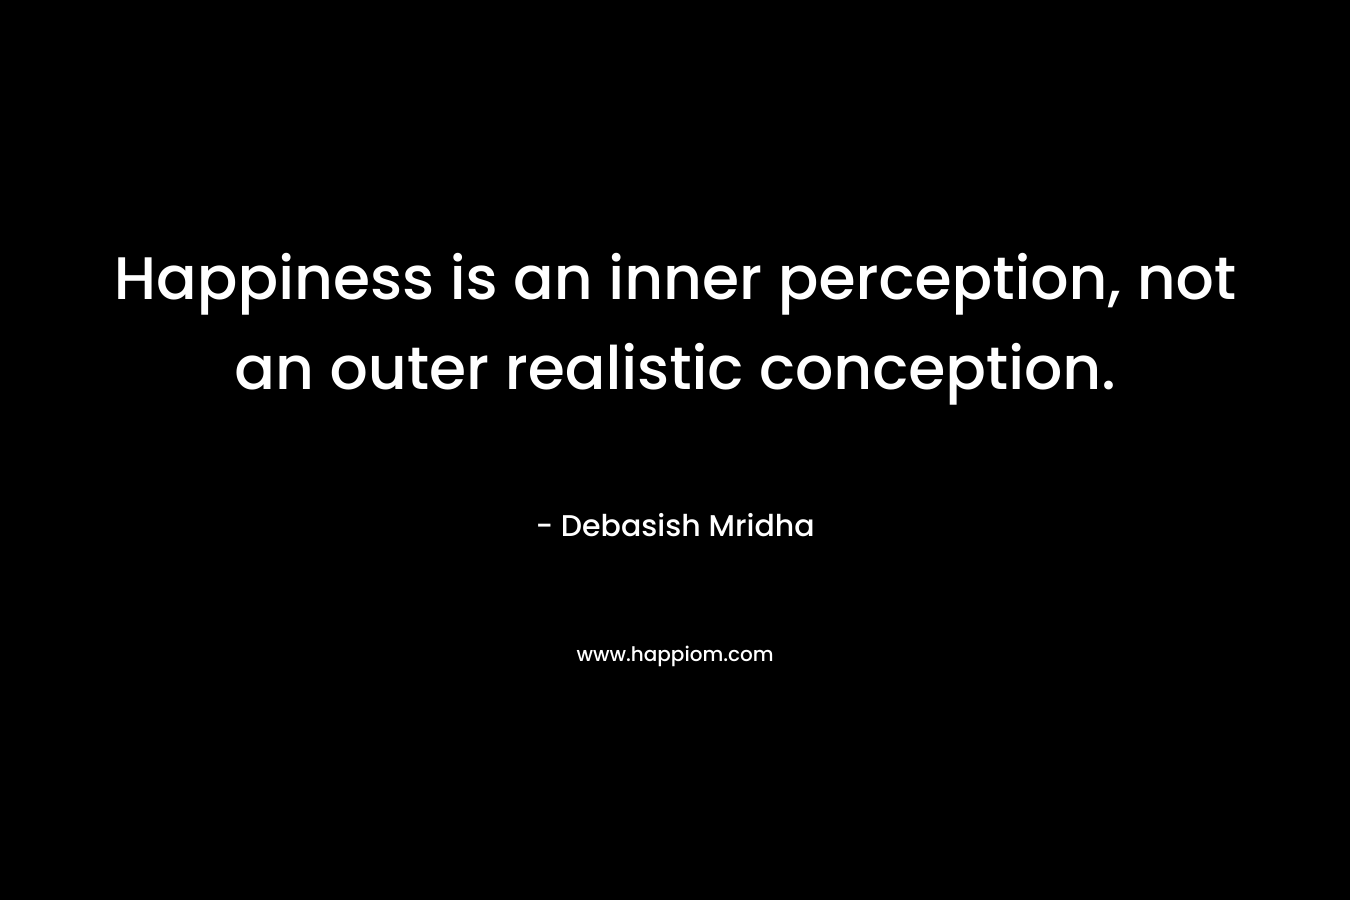 Happiness is an inner perception, not an outer realistic conception.